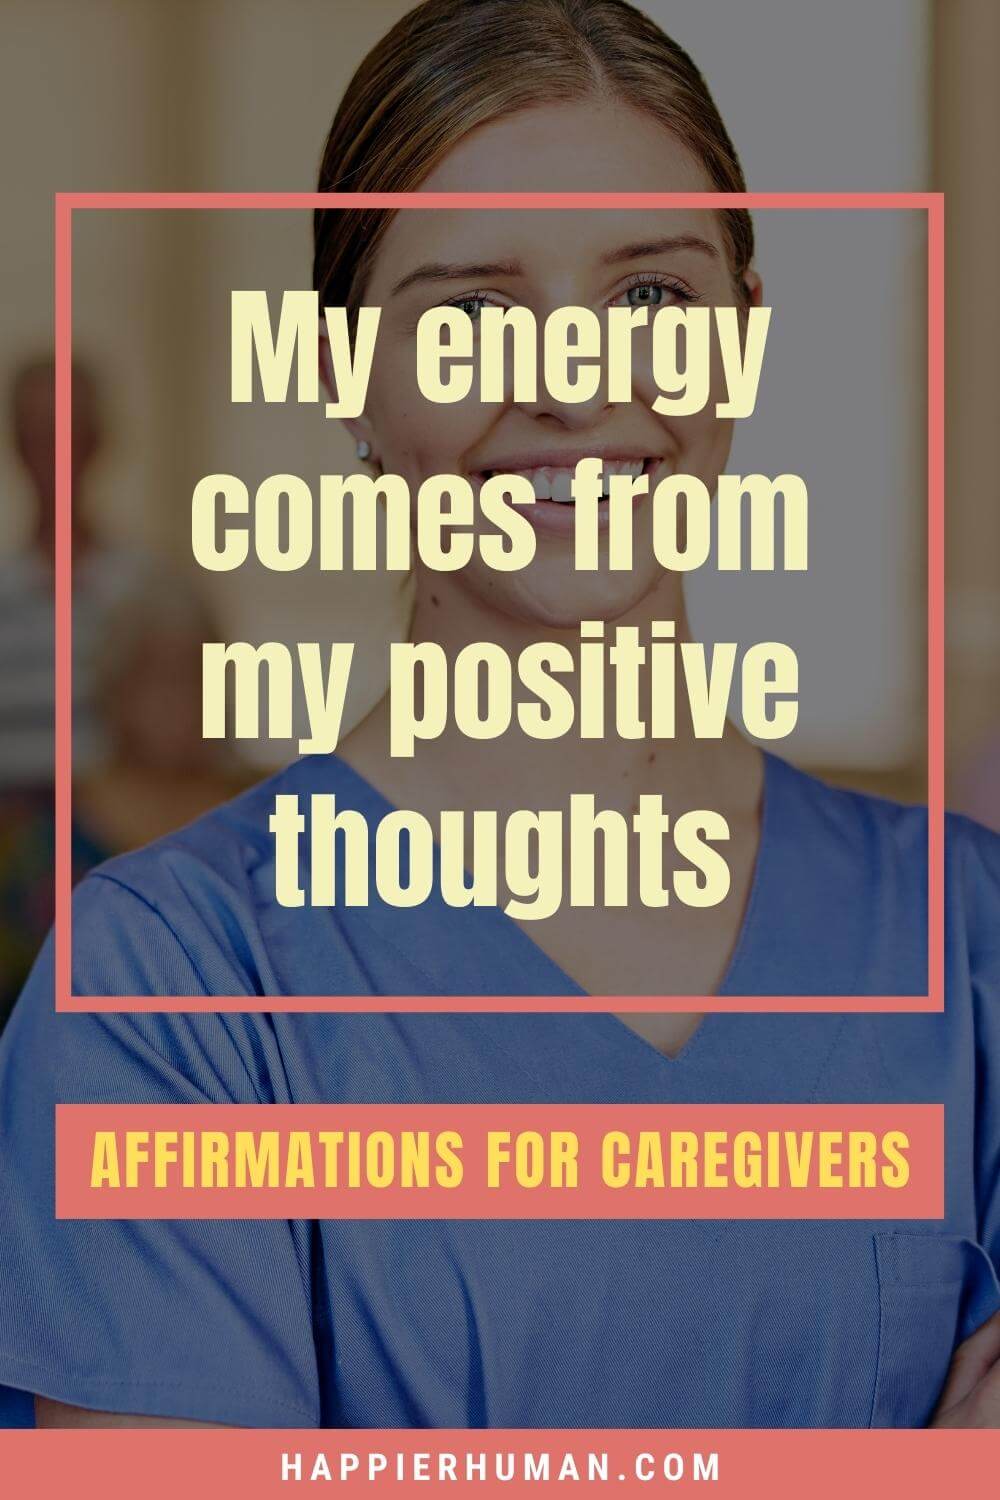 Affirmations For Caregivers - My energy comes from my positive thoughts | affirmation examples | words of affirmation | affirmations for cancer caregivers